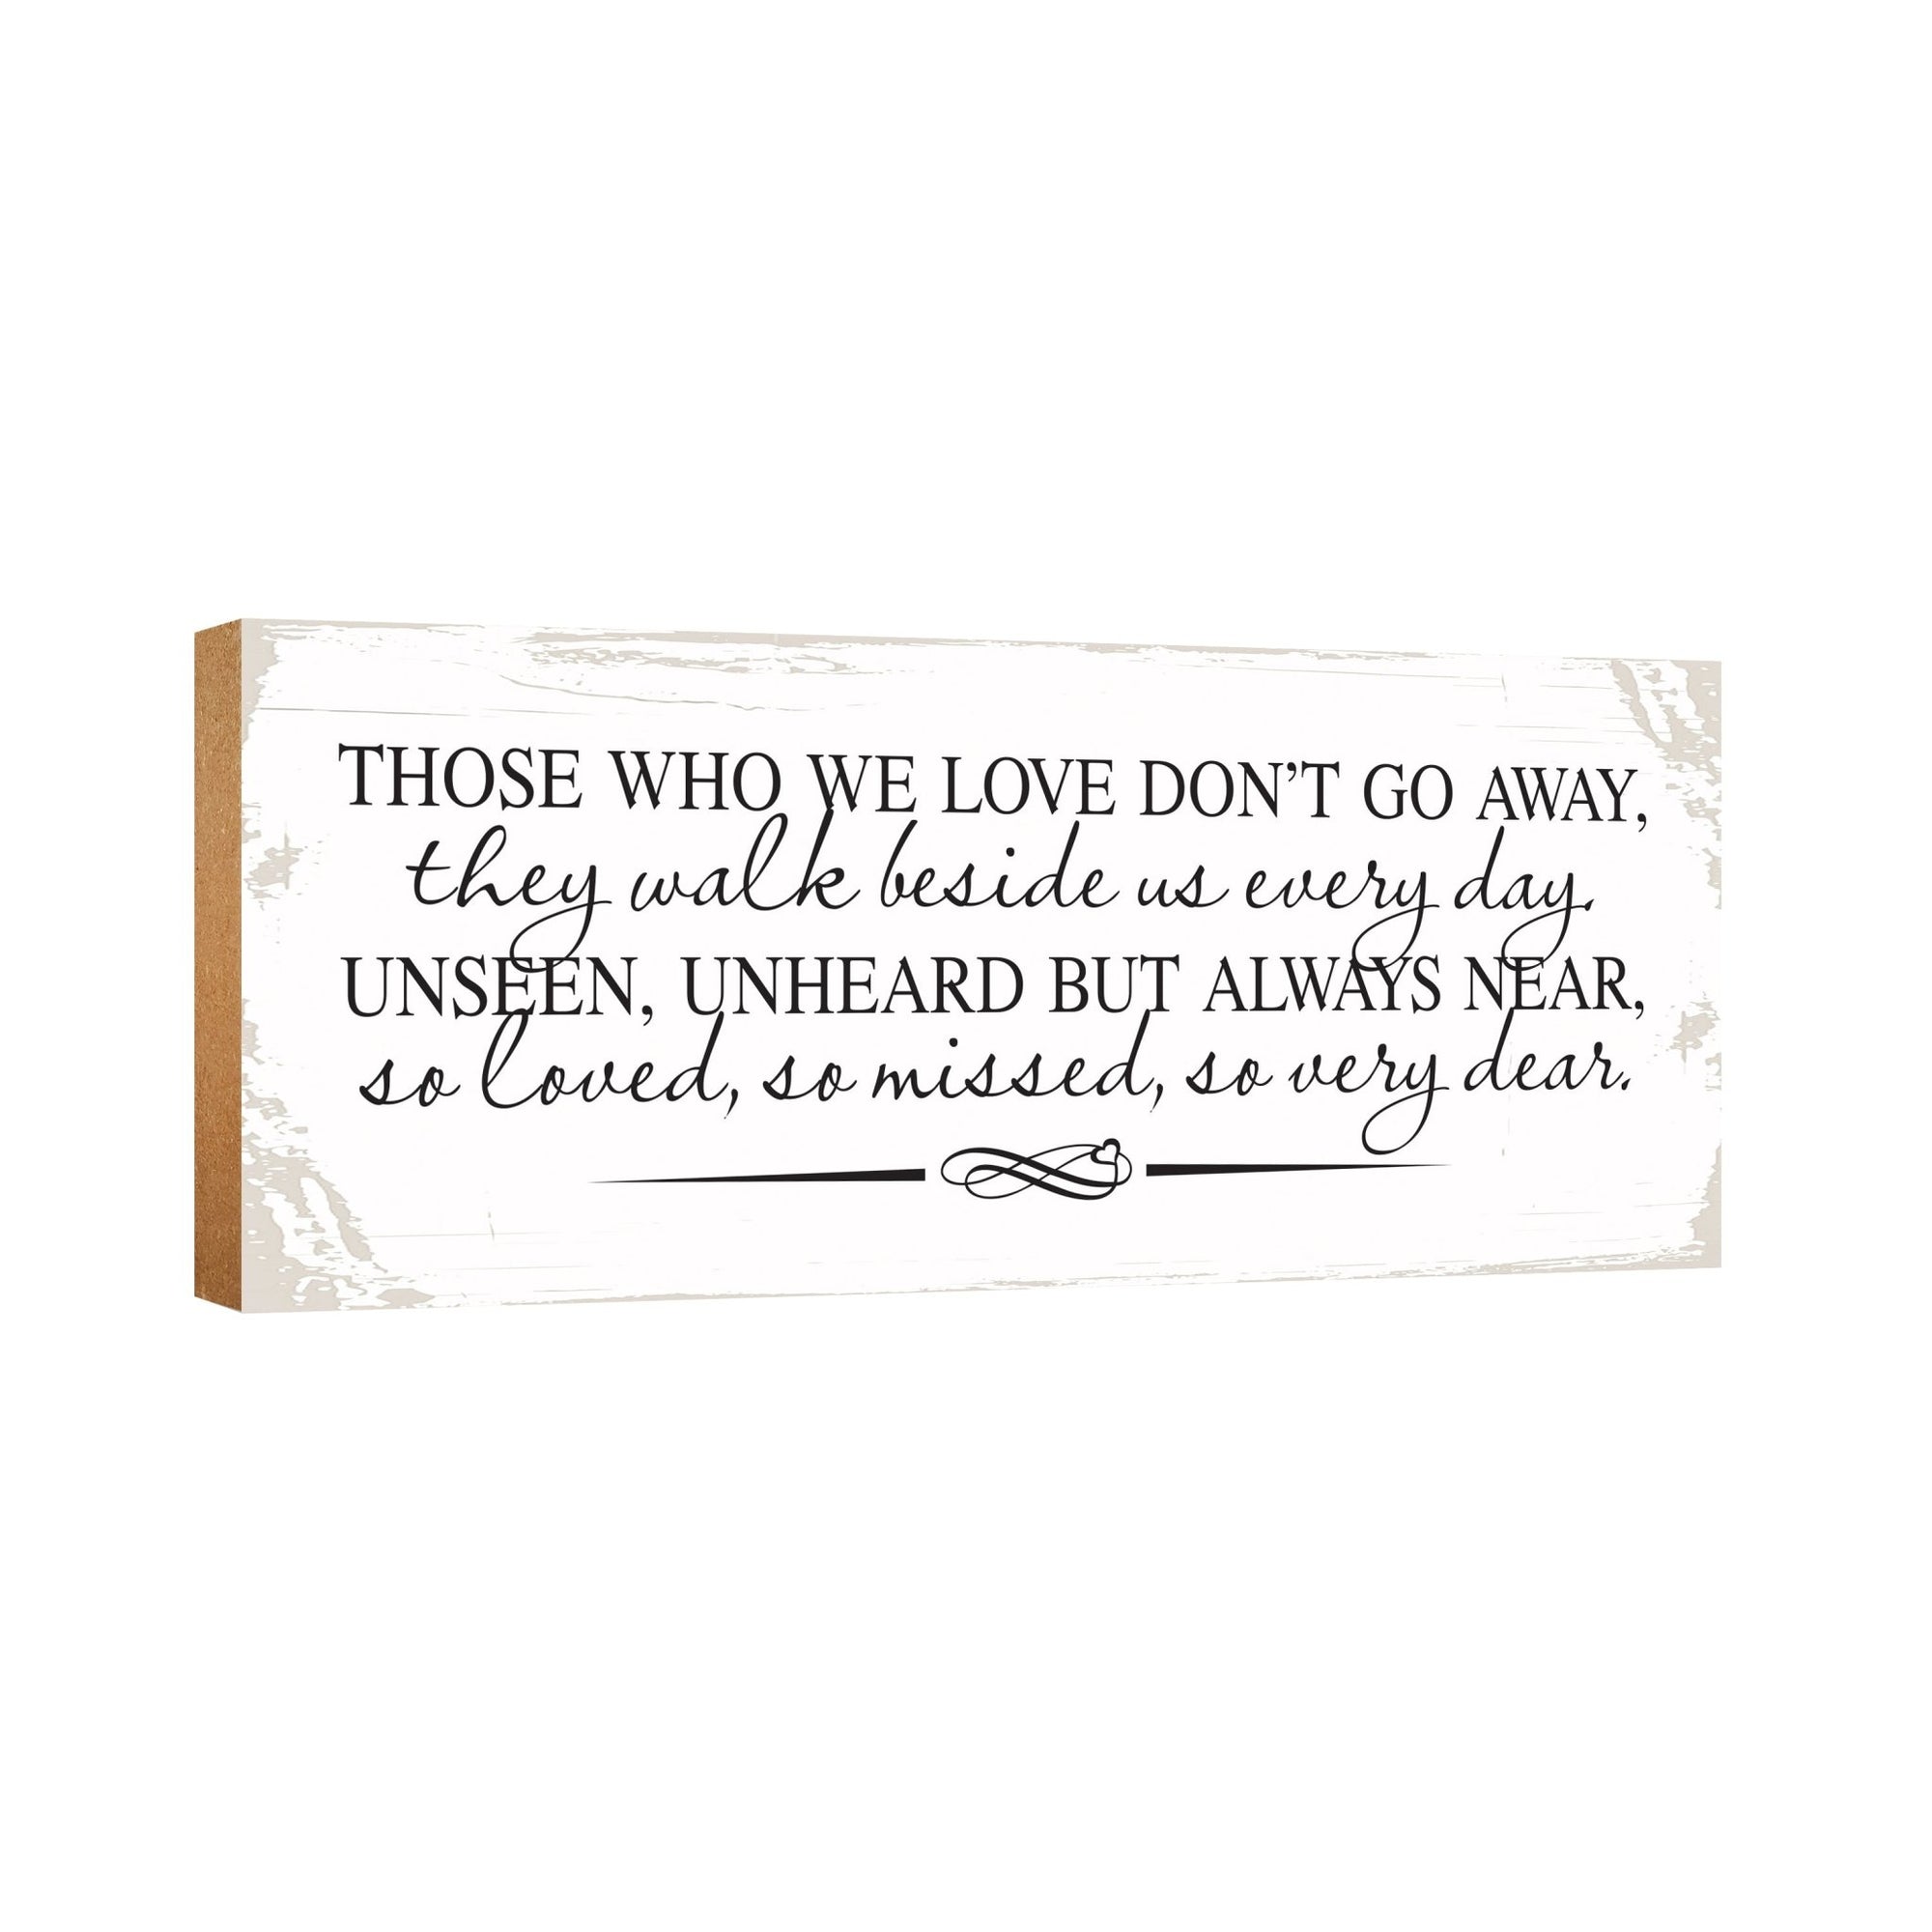 Modern Inspirational Pet Memorial 4x10 inches Wooden Sign (Those Who We Love) Tabletop Plaque Home Decoration Loss of Pet Bereavement Sympathy Keepsake - LifeSong Milestones